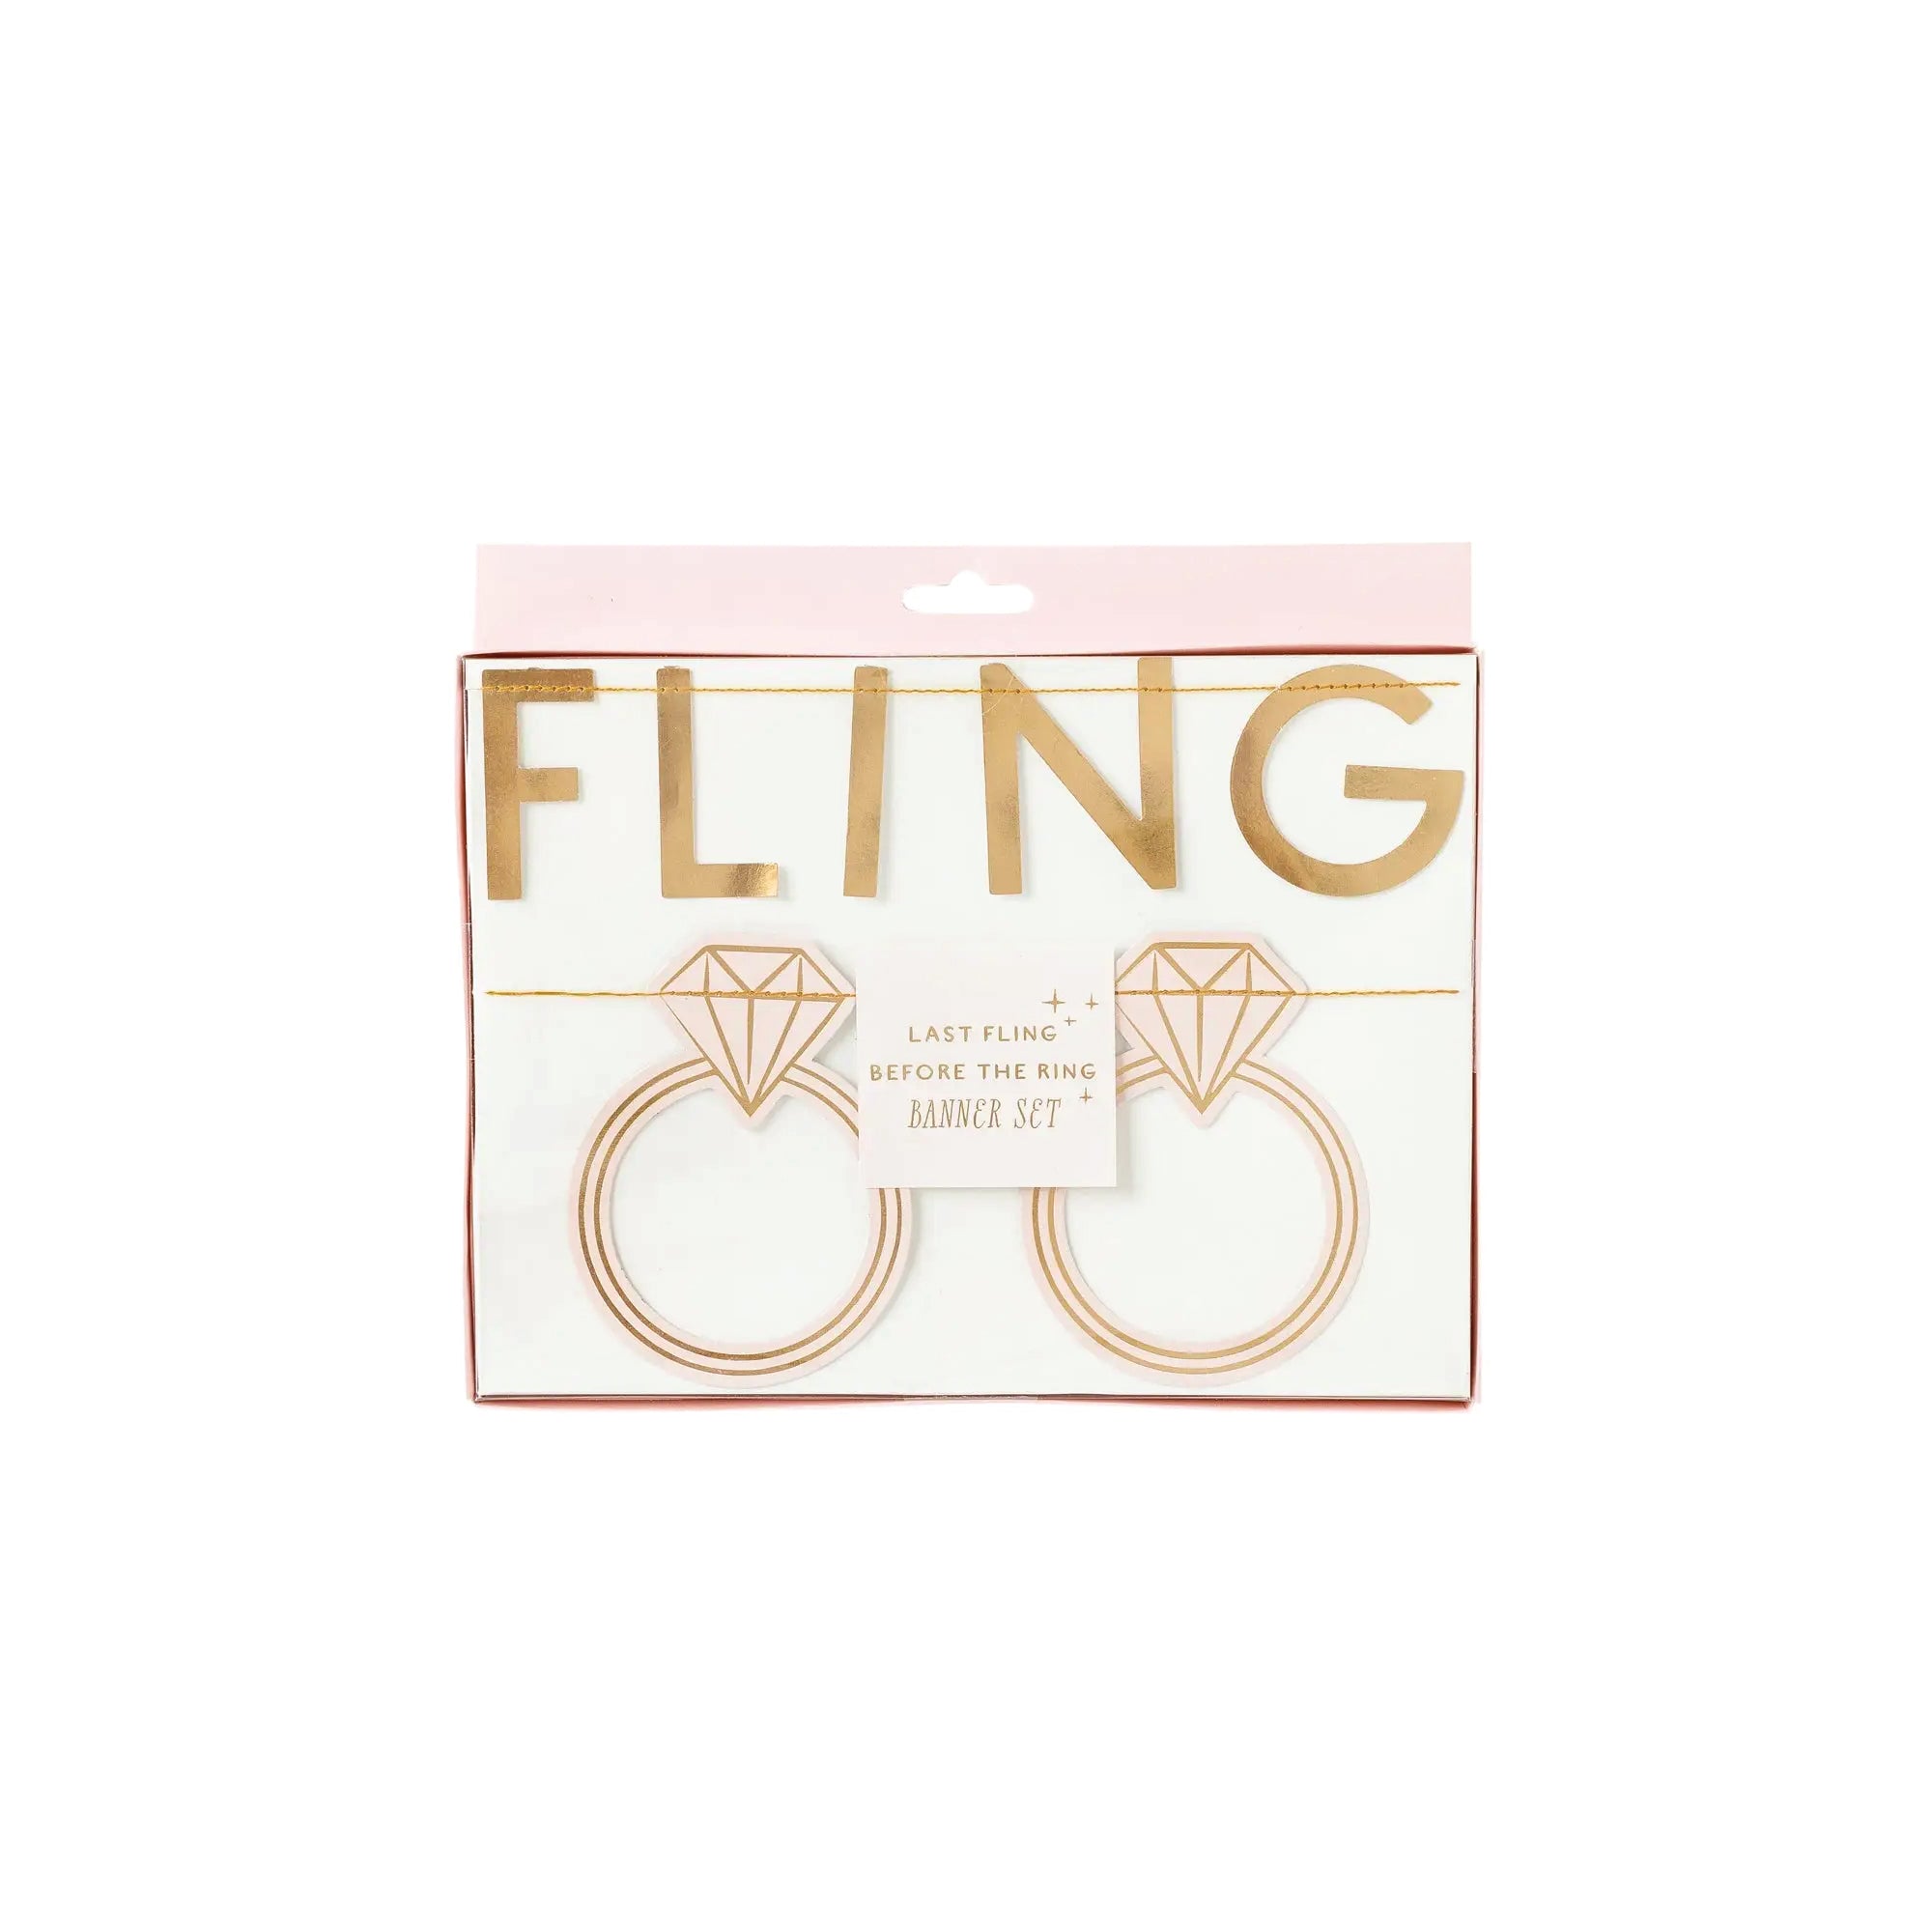 Last Fling Before The Ring Banner Set | The Party Darling